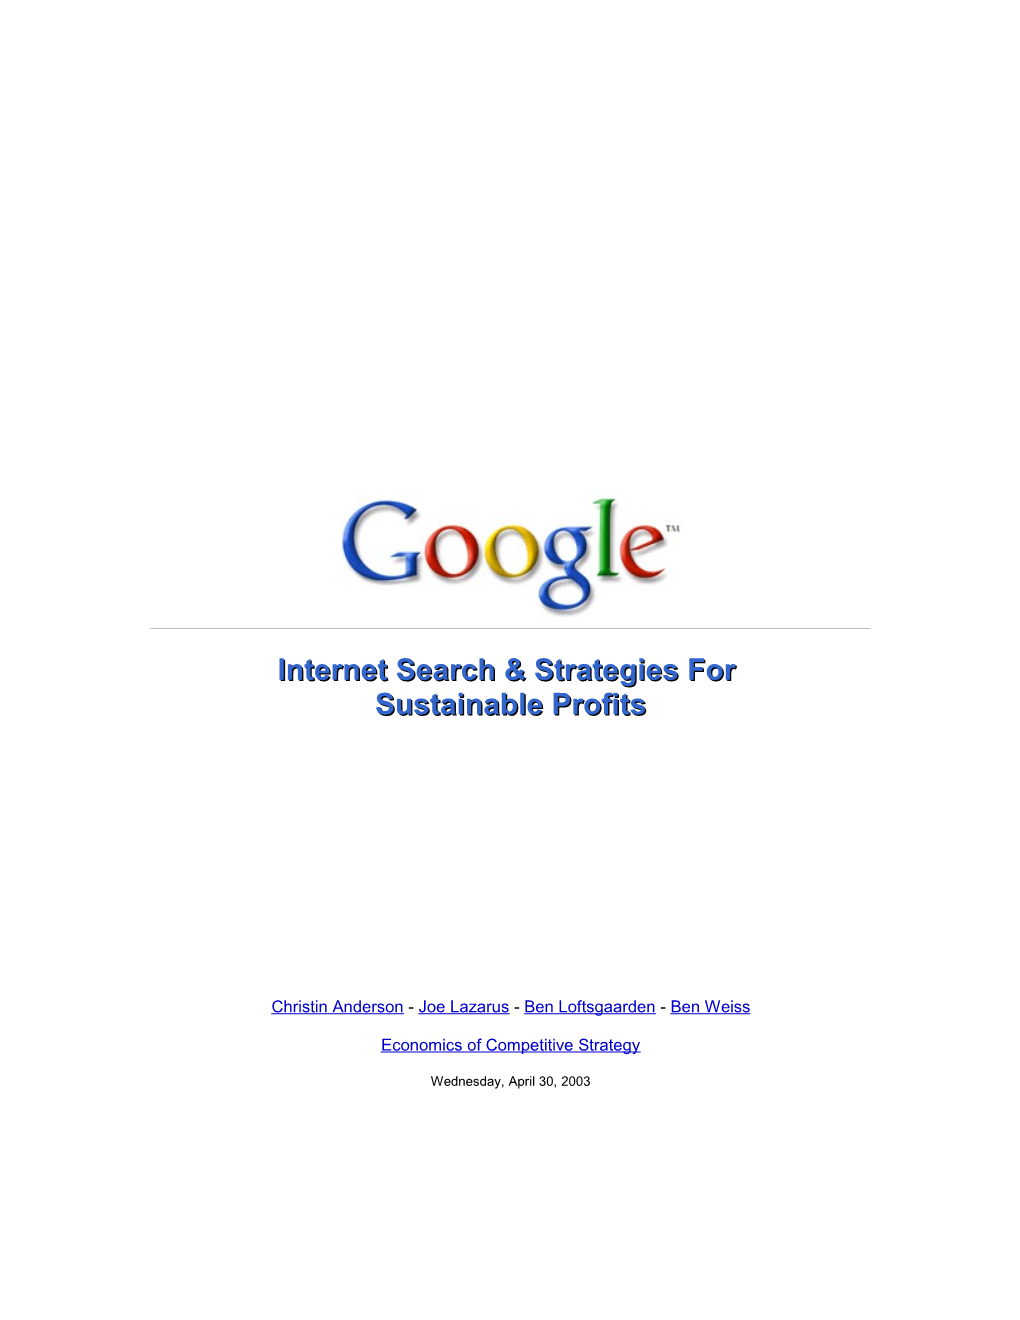 Internet Search & Strategies For